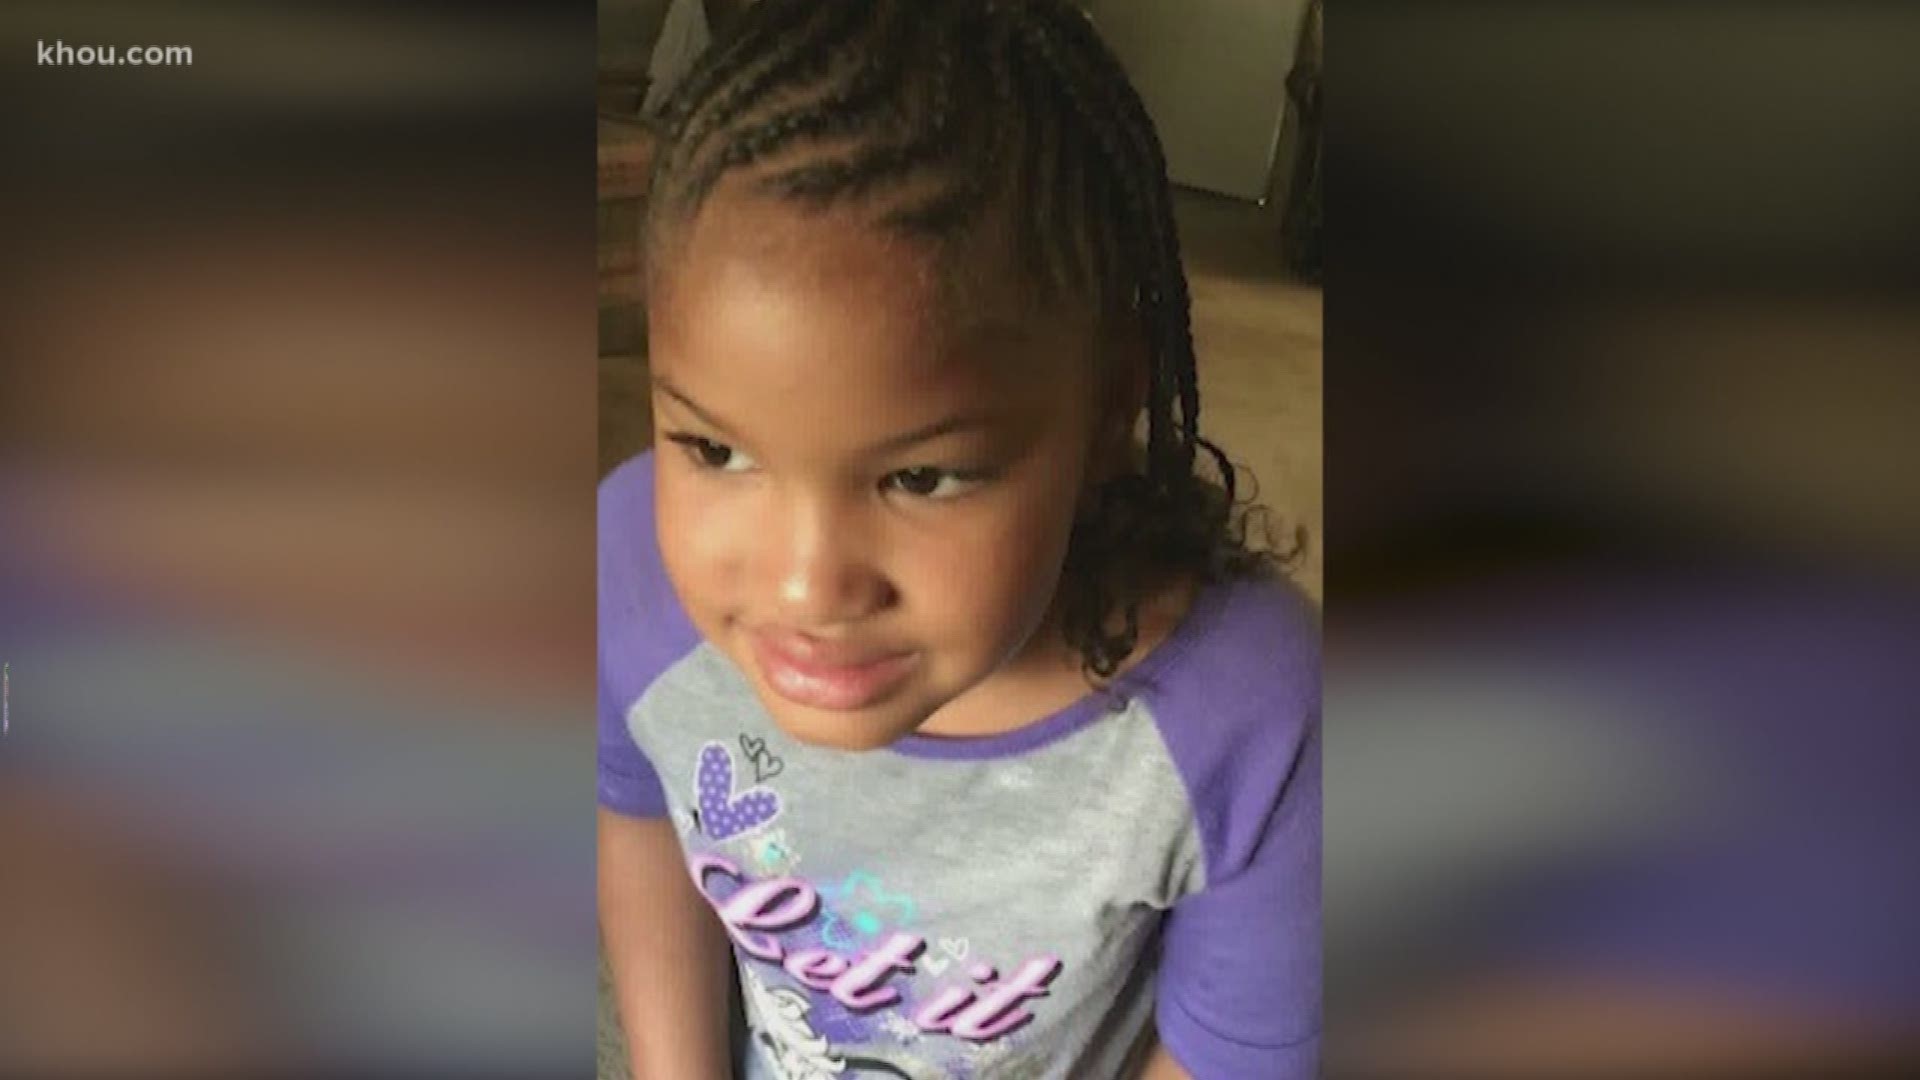 Larry D. Woodruffe, a capital murder suspect in the shooting death of 7-year-old Jazmine Barnes, faced a judge for the first time Thursday morning.